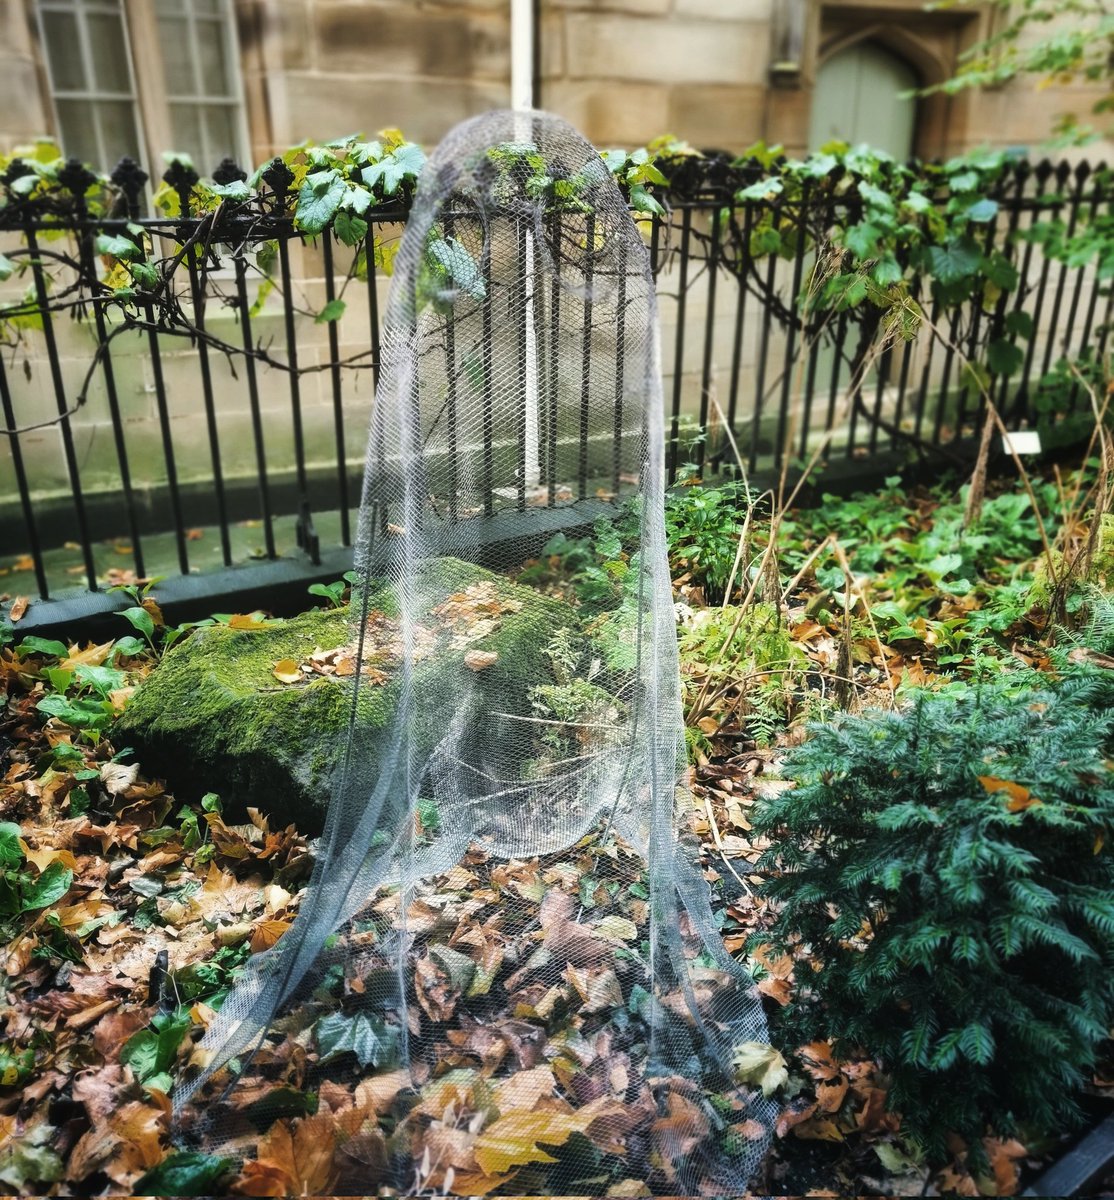 Ghost Week starts this Sunday 23rd Oct. As a Ghost Week partner event Ghosts In The Gardens has added a special new ghost to our collection. You can find this ghost at DIG on St Saviougate. Happy ghost hunting! #ghostweek #ghostsinthegardens